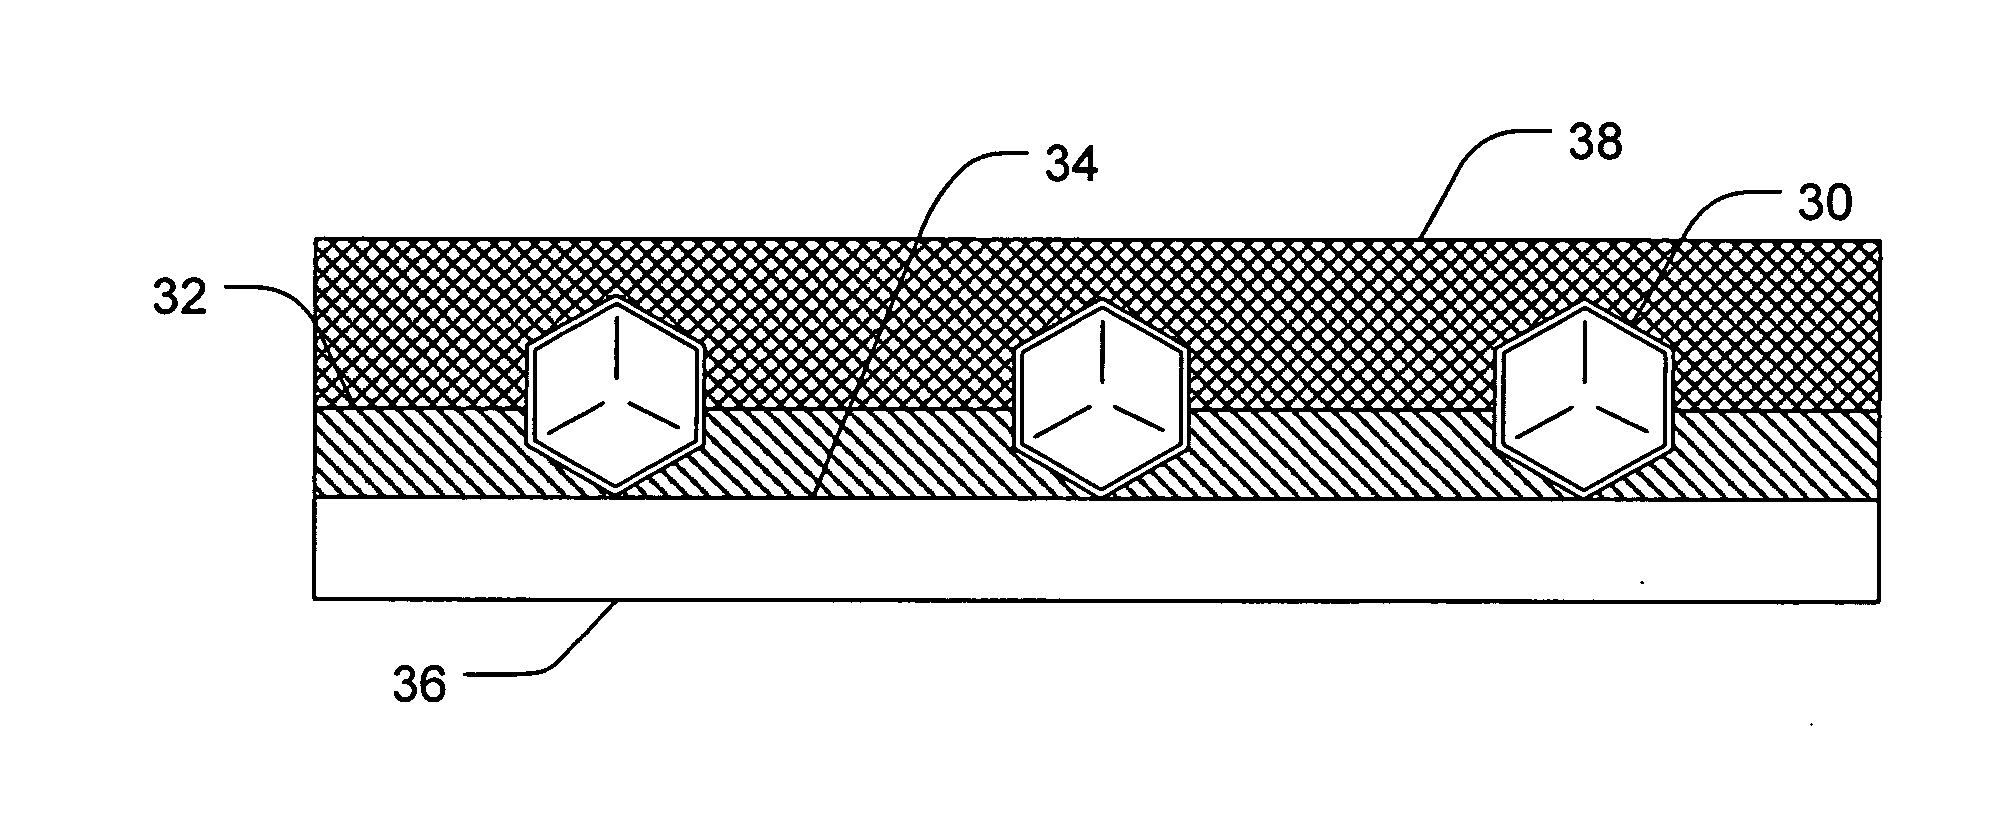 Low-melting point superabrasive tools and associated methods